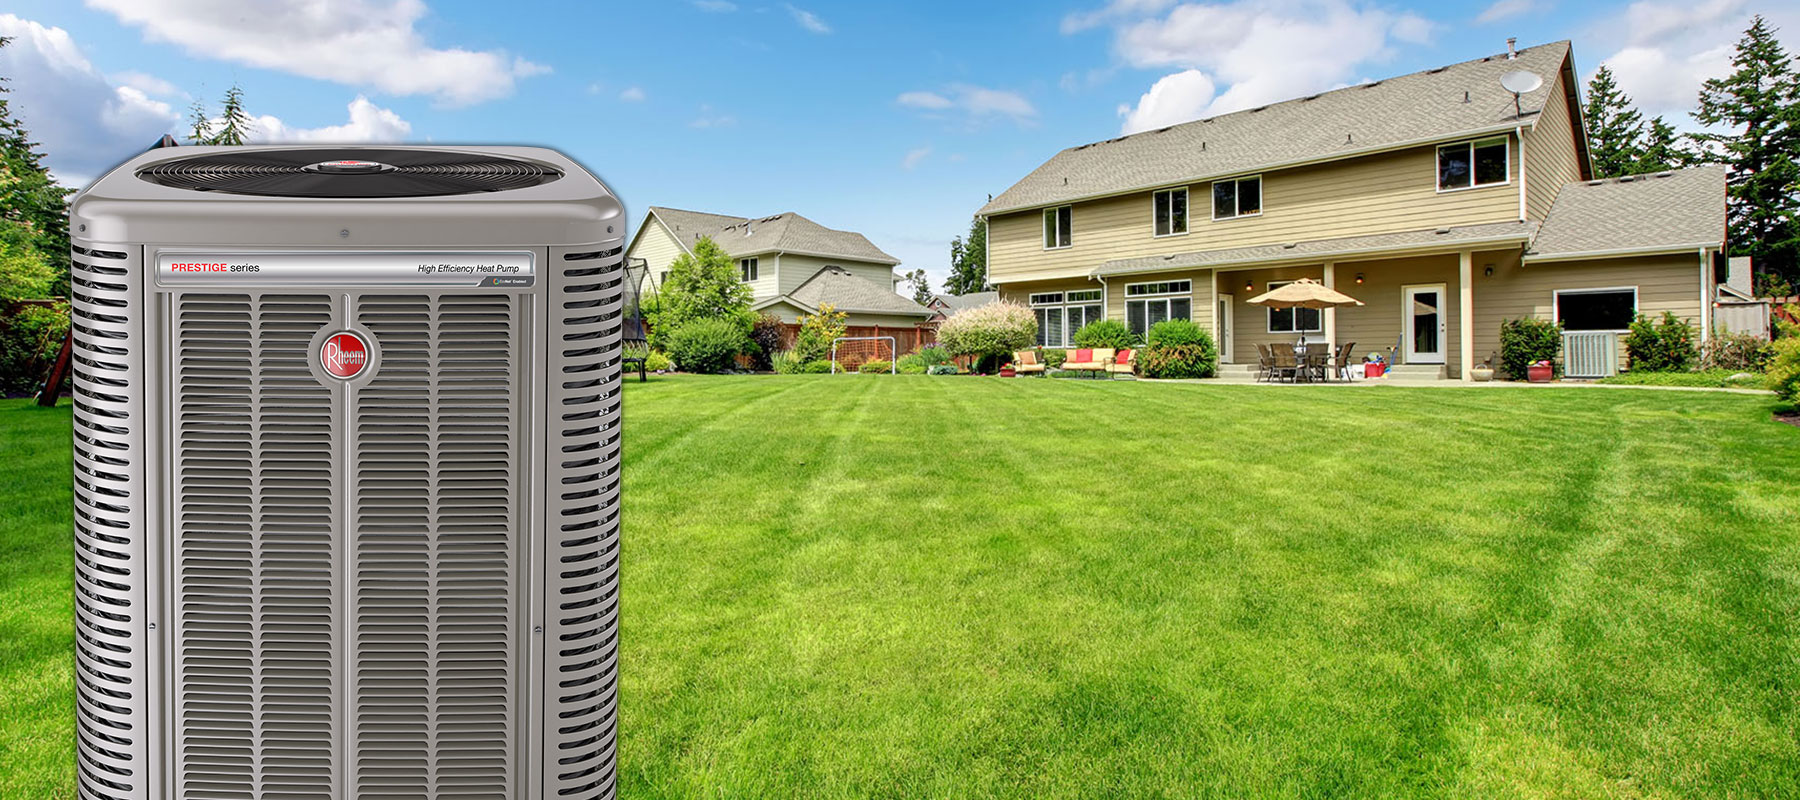 Heating & Cooling Services in California, USA